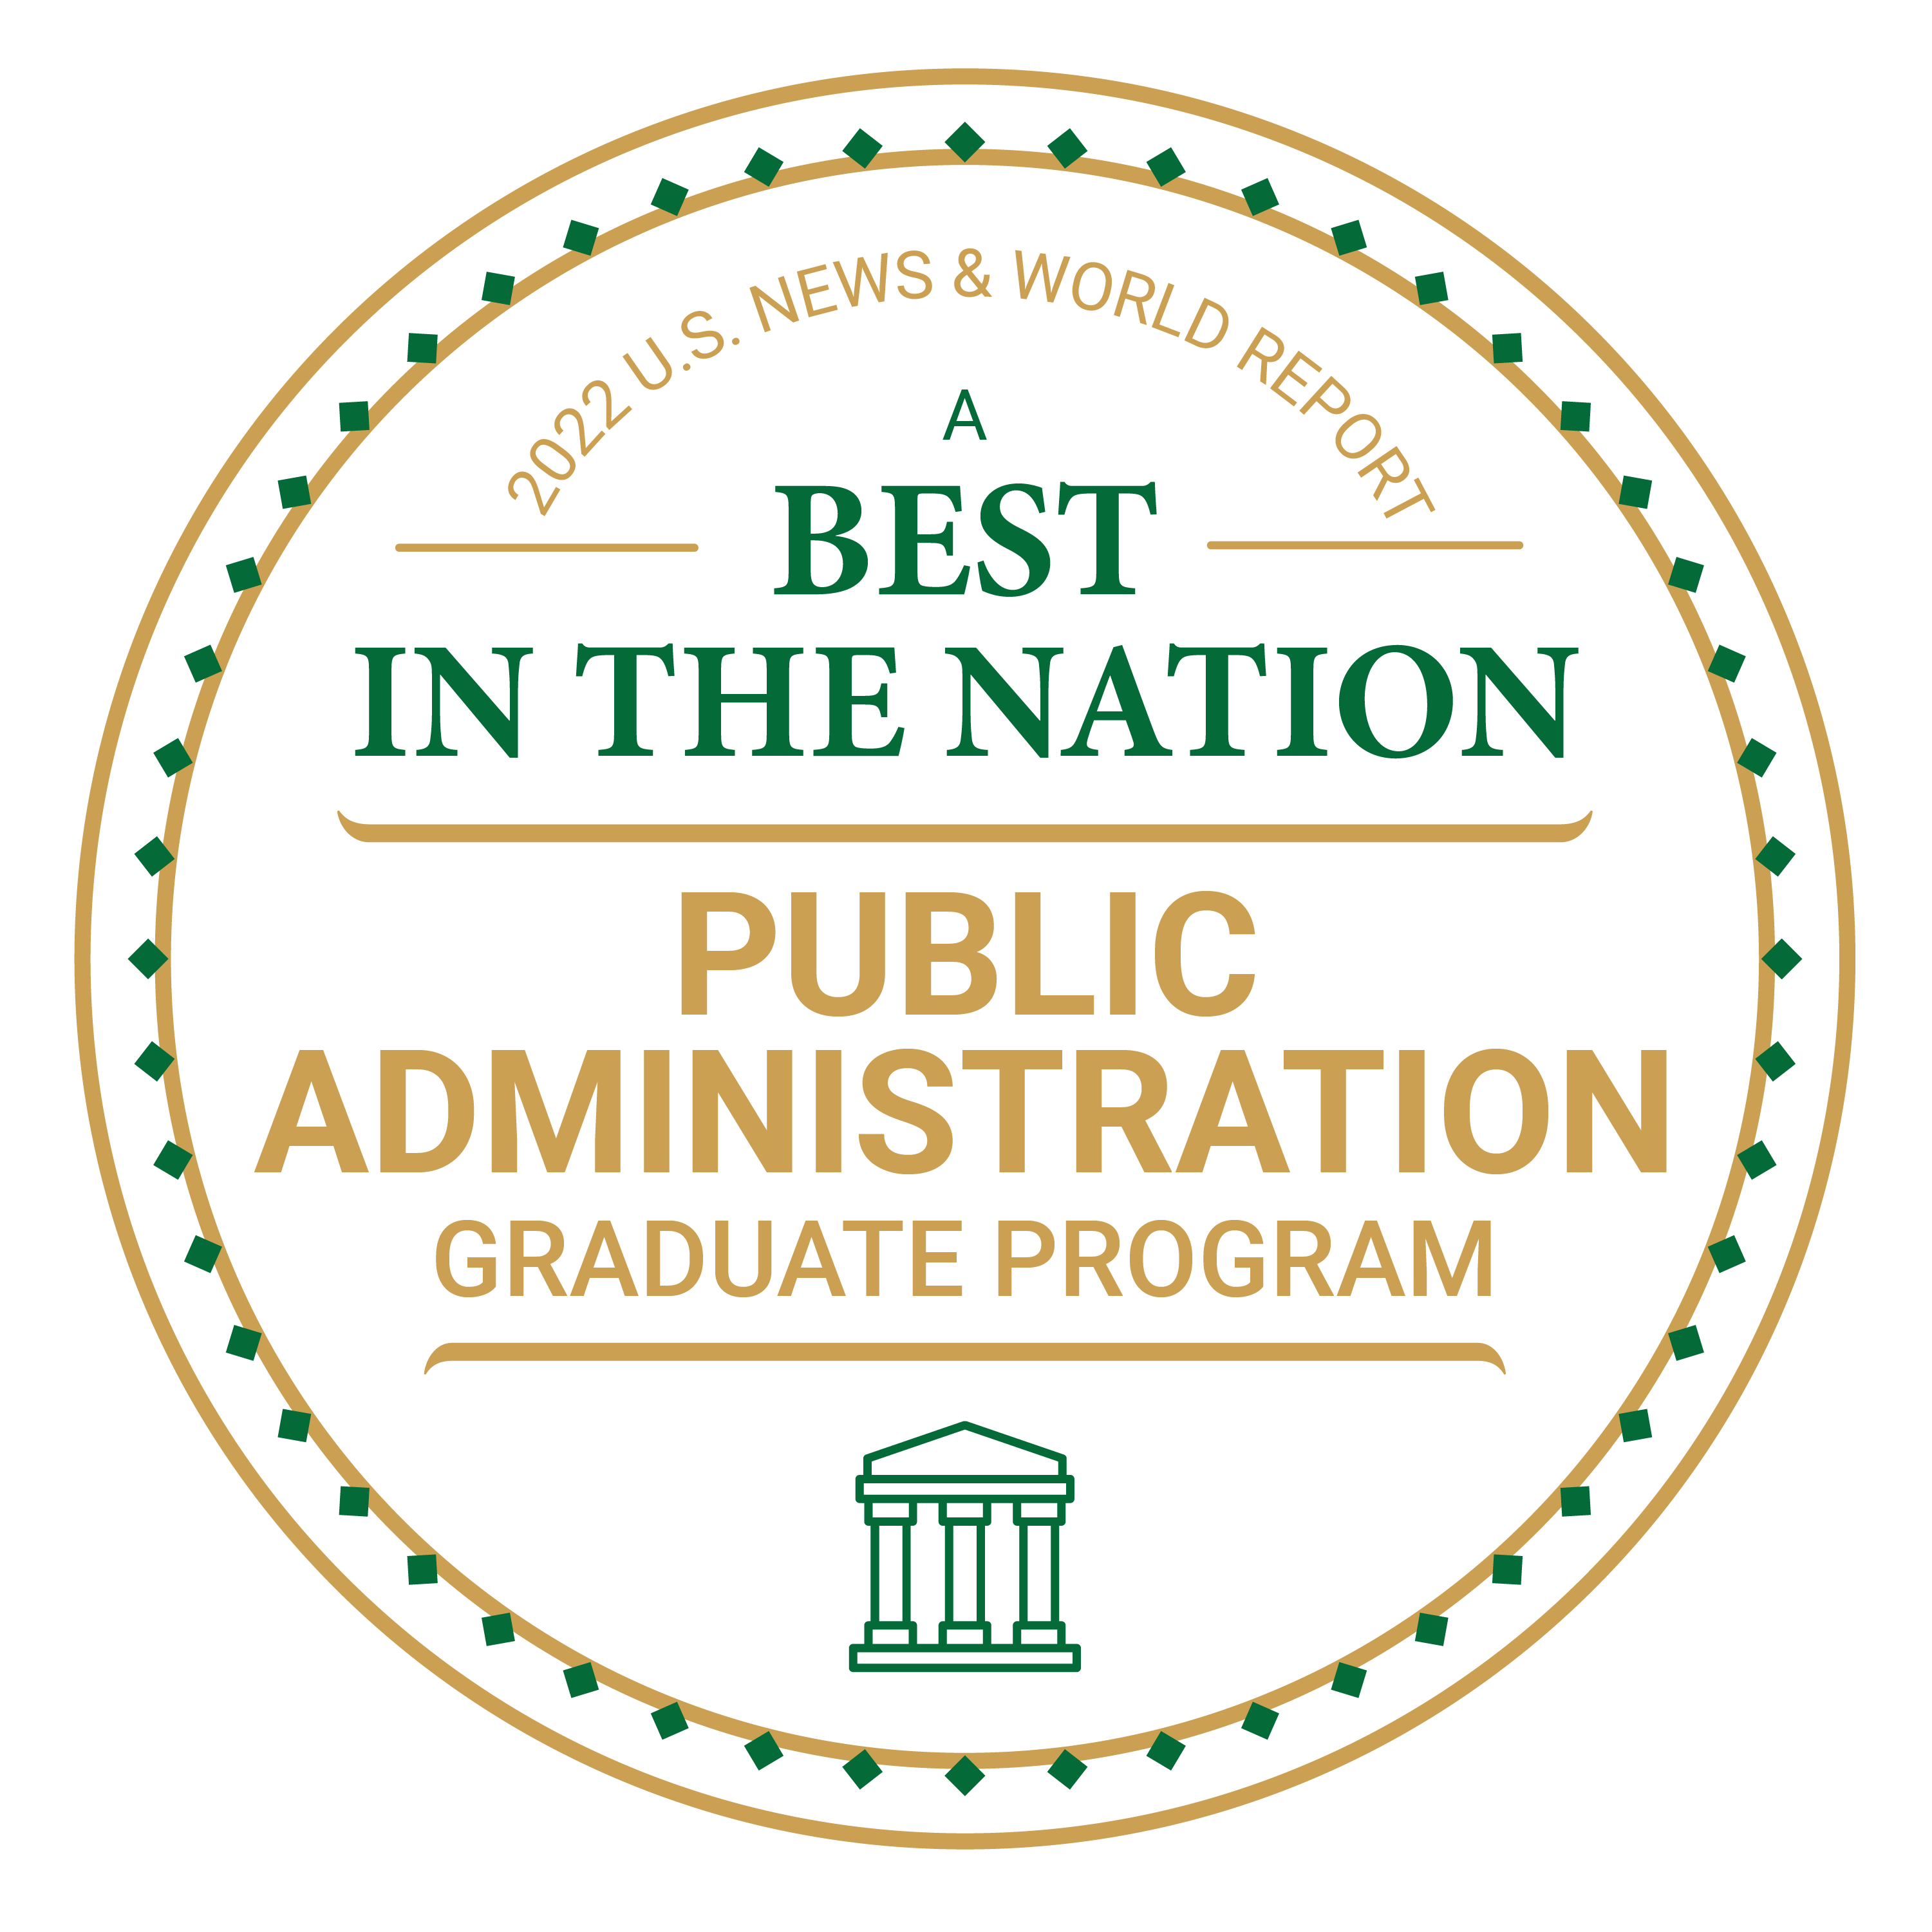 2022 U.S. News & World Report A Best in the Nation Public Administration Graduate Program